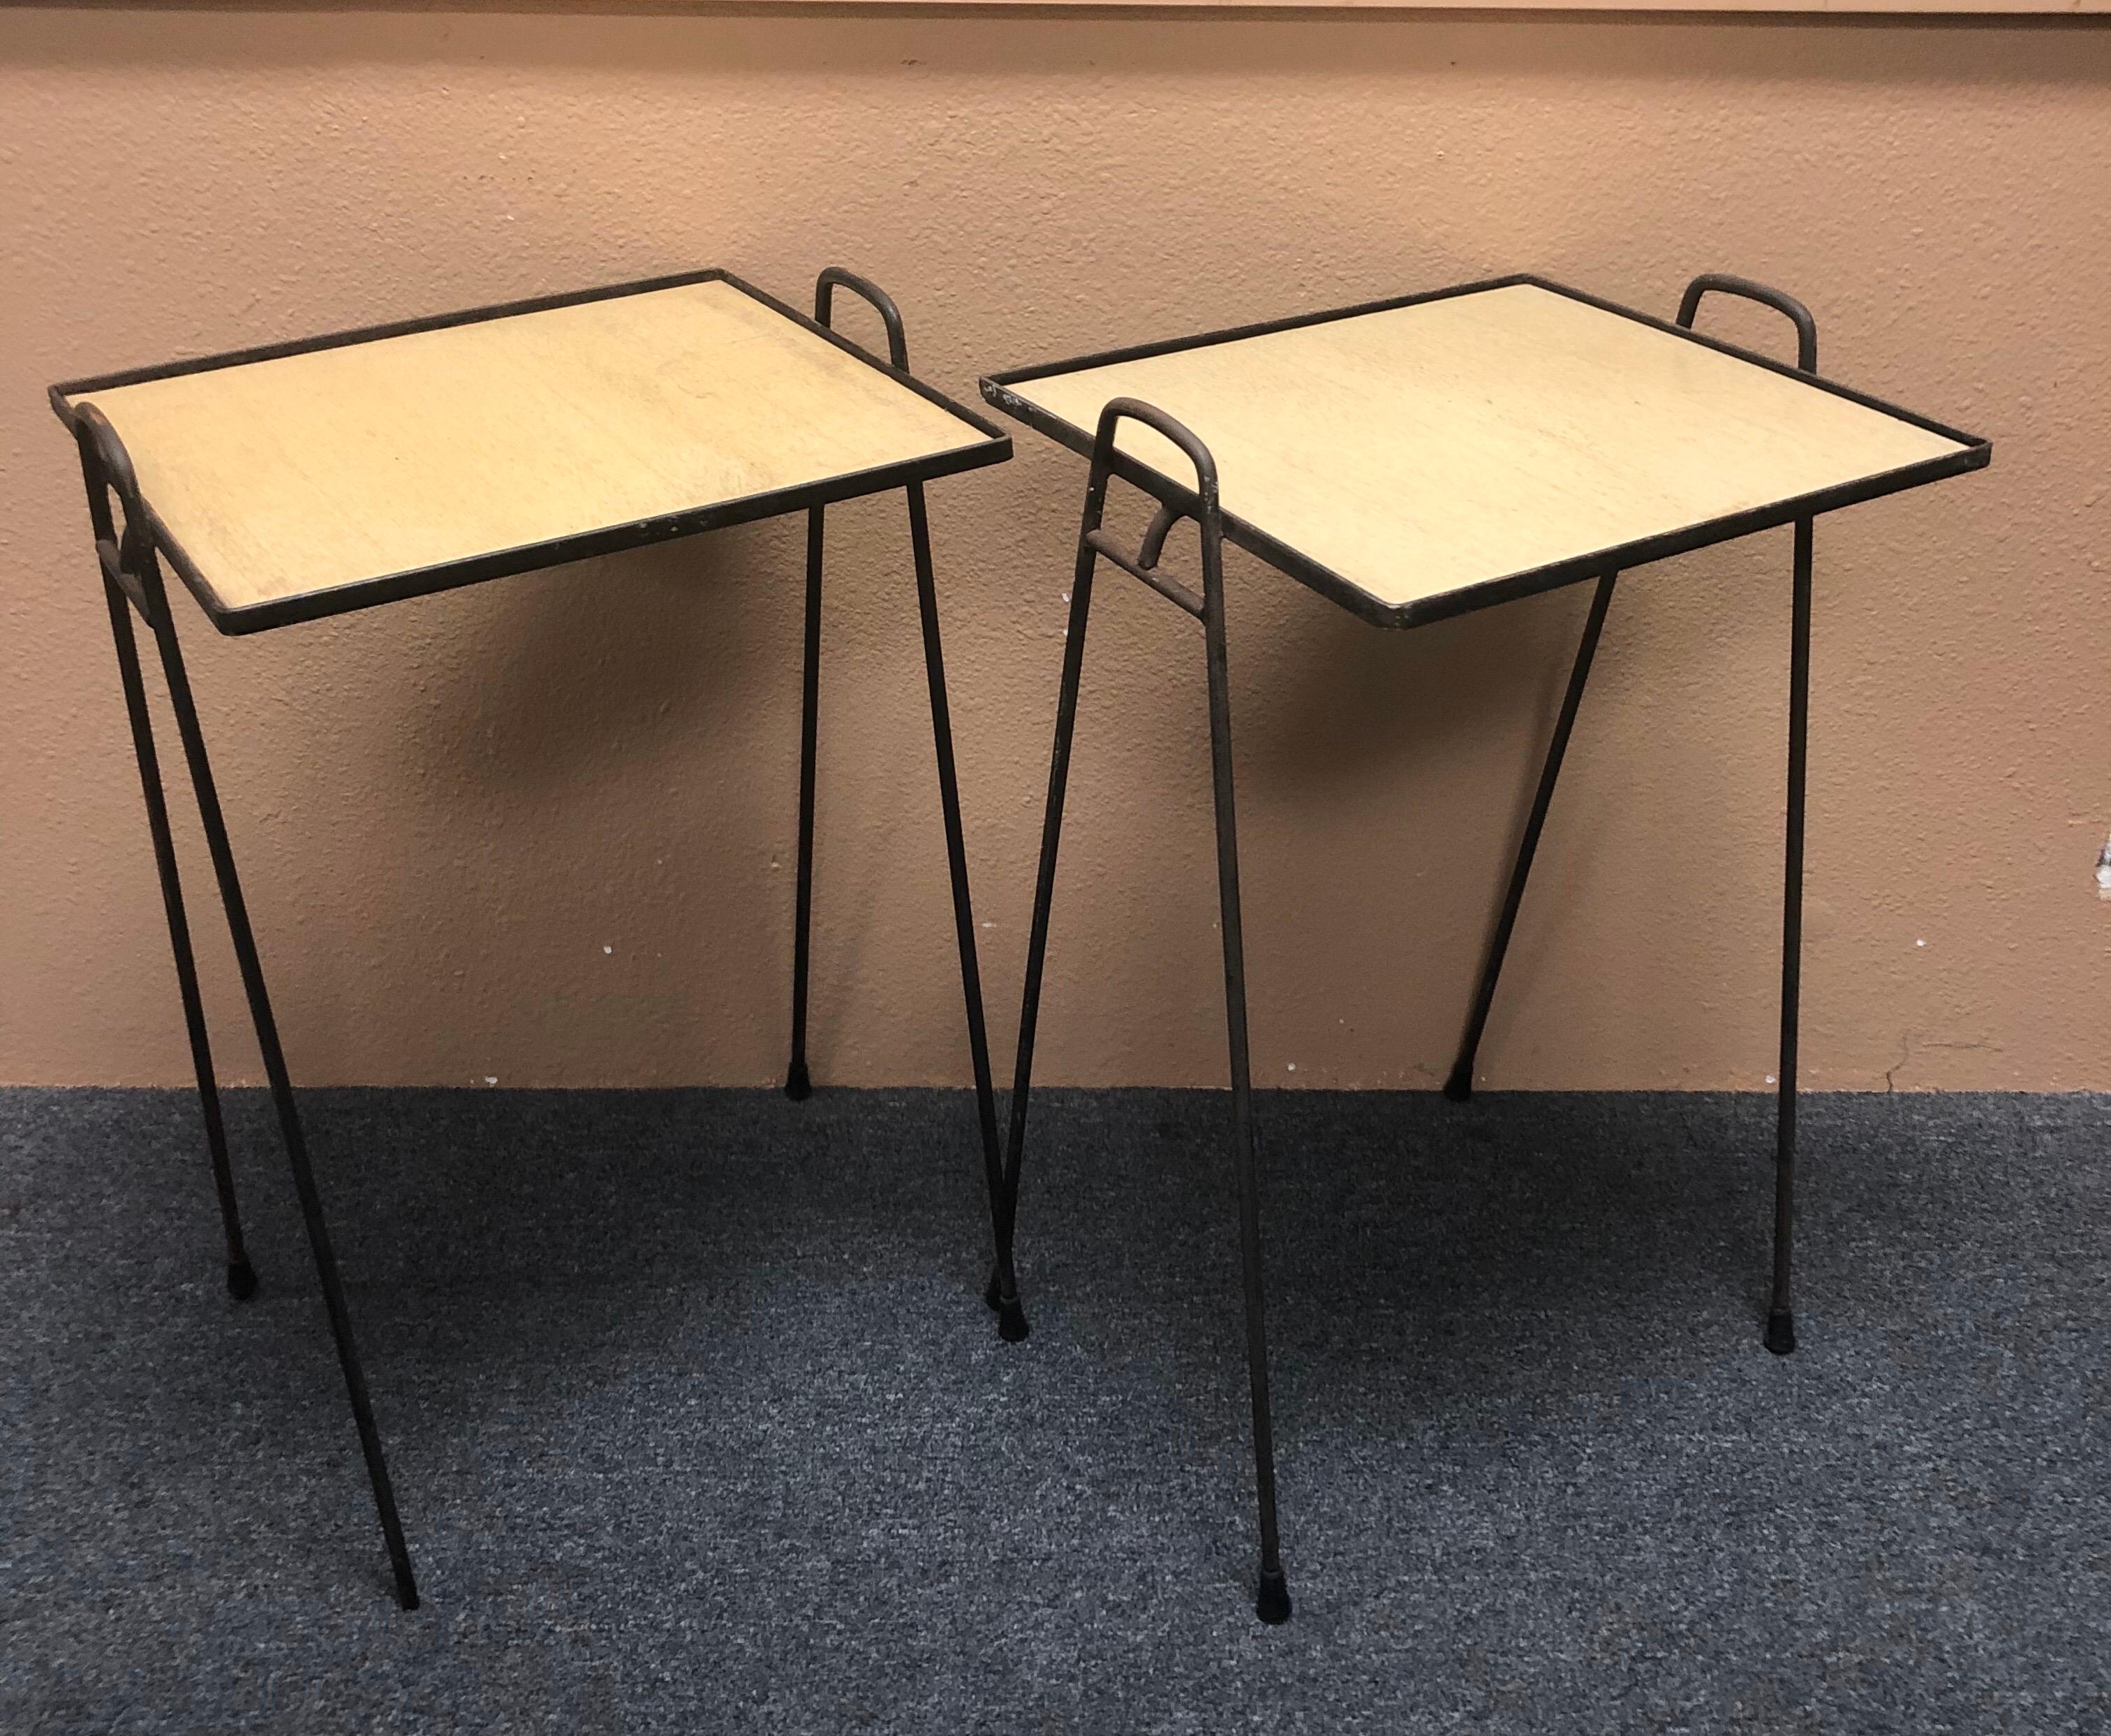 A very cool and functional pair of midcentury hairpin stacking TV tray tables, circa 1960s. The table frames are made of welded steel and the tray tops of laminated blonde wood. The set is in fair vintage condition with plenty of patina. Nice rustic